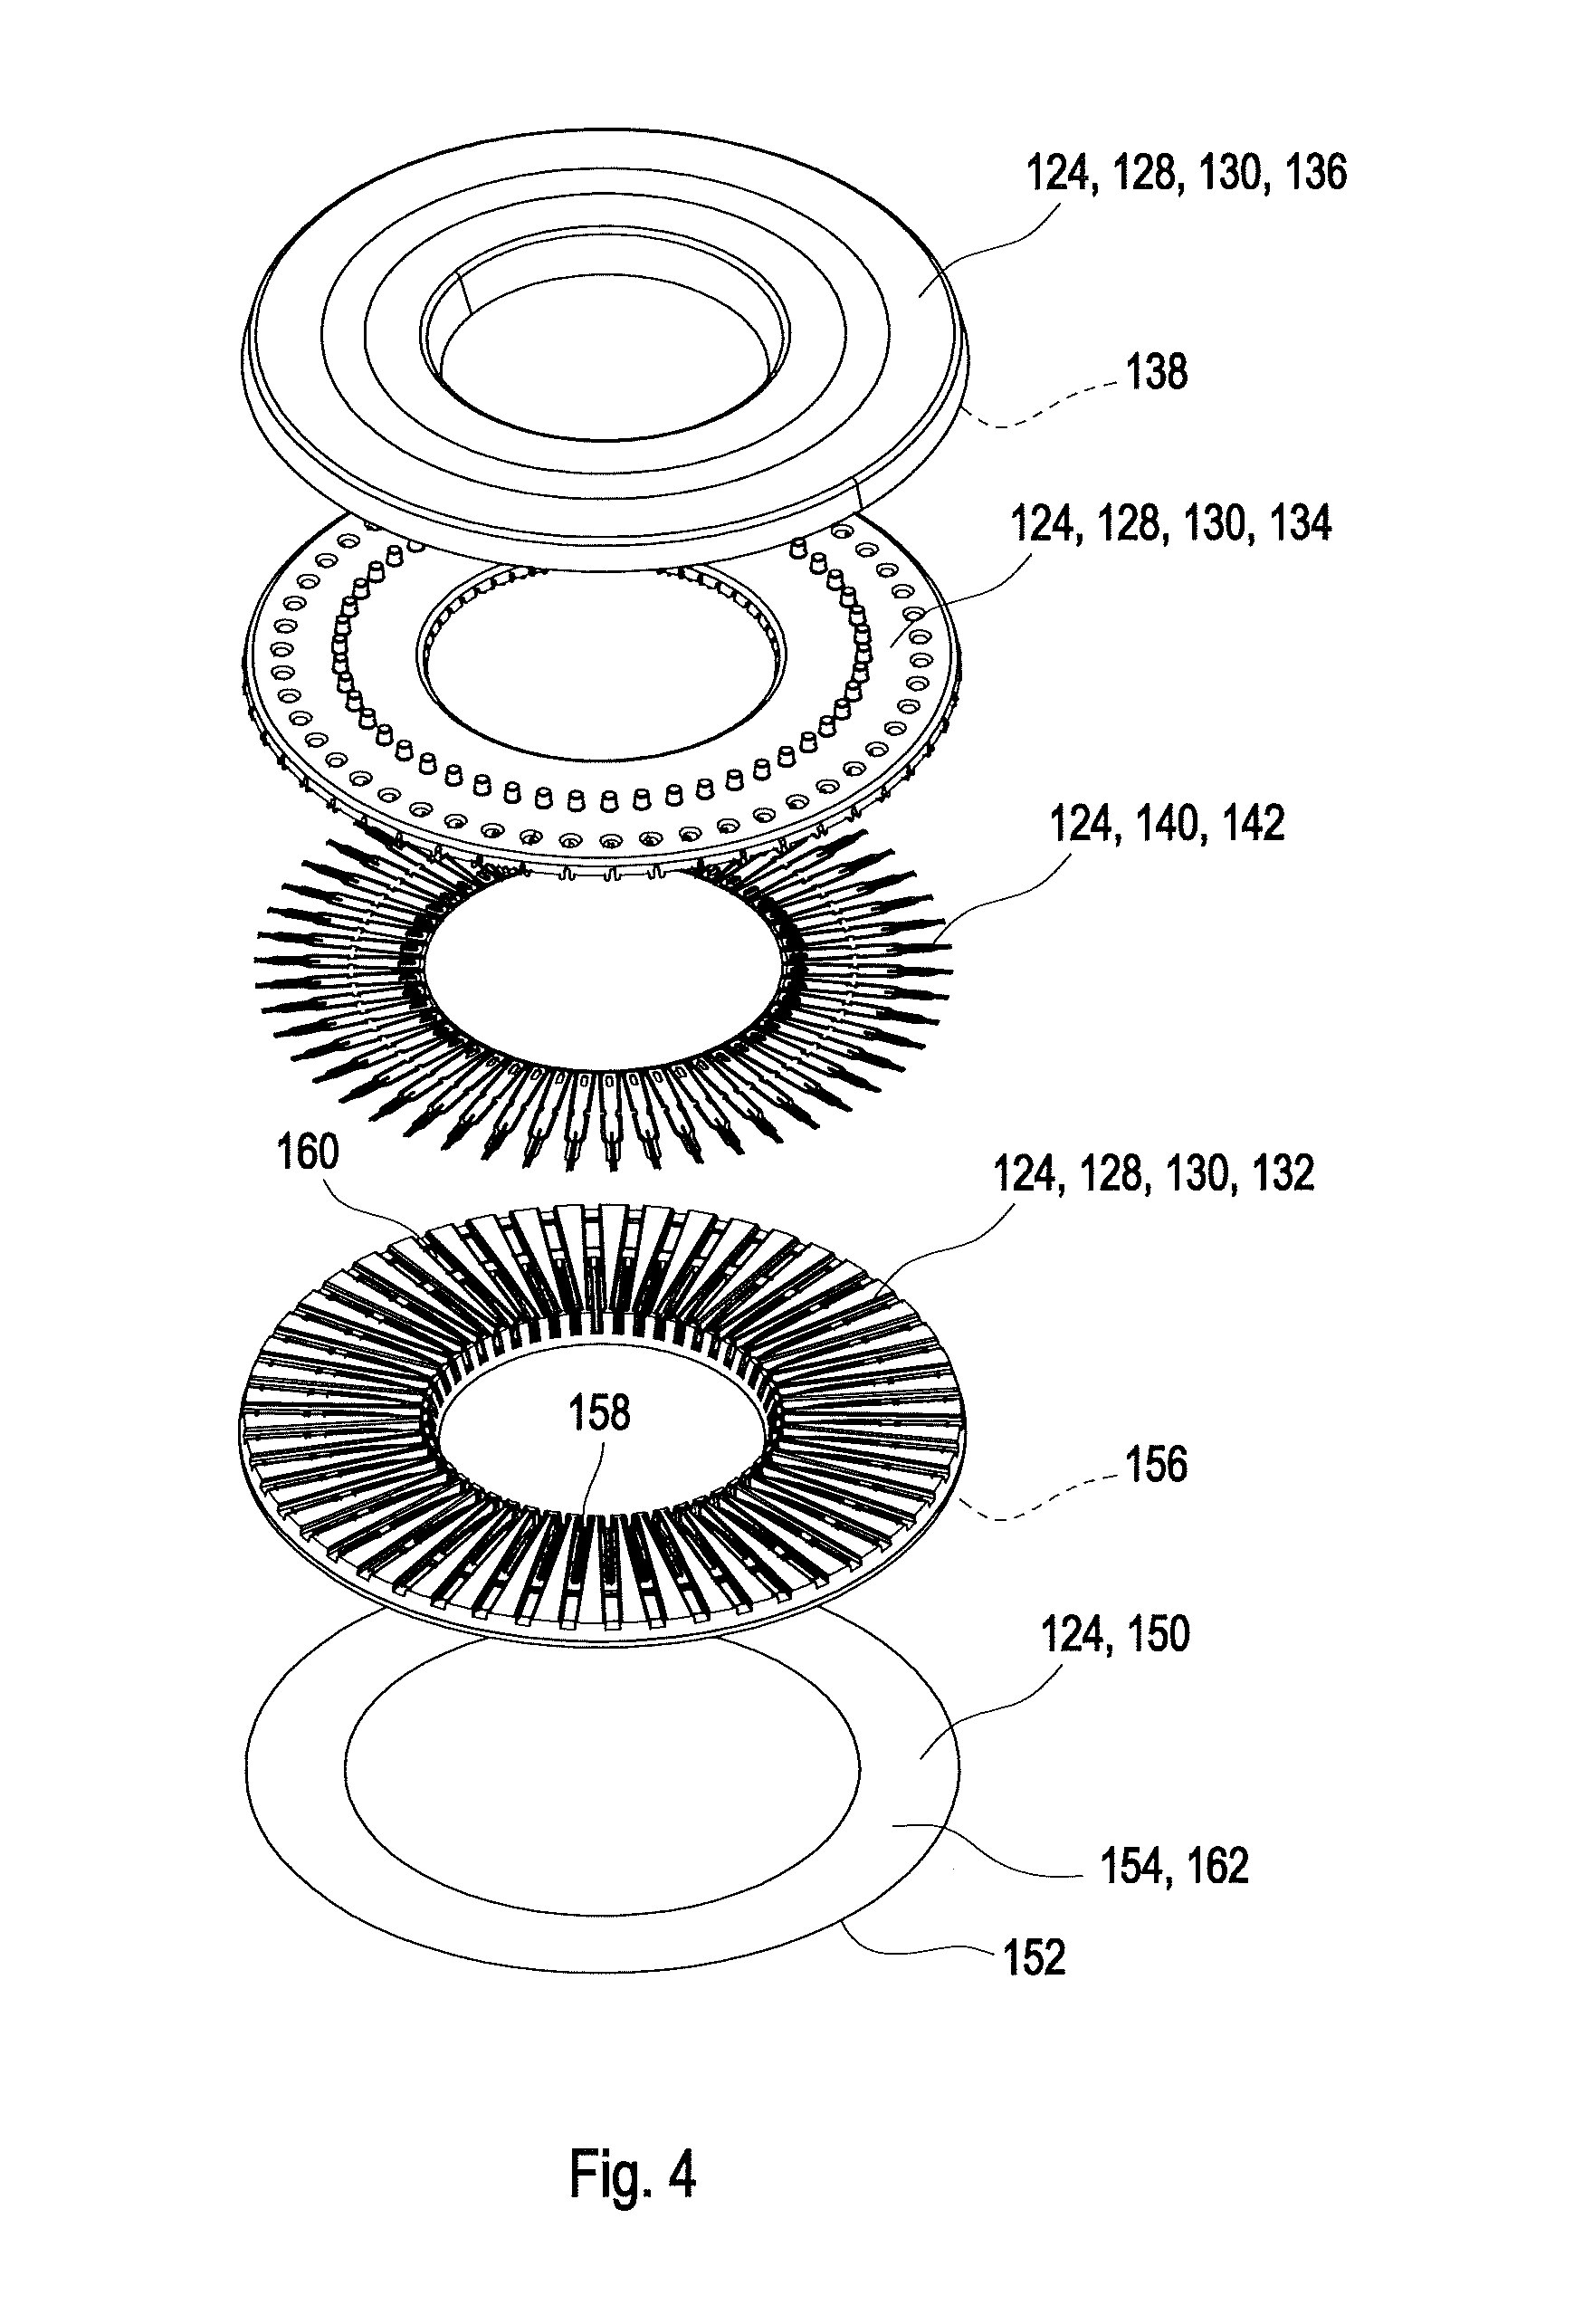 Method and Device for Detecting an Analyte in a Body Fluid